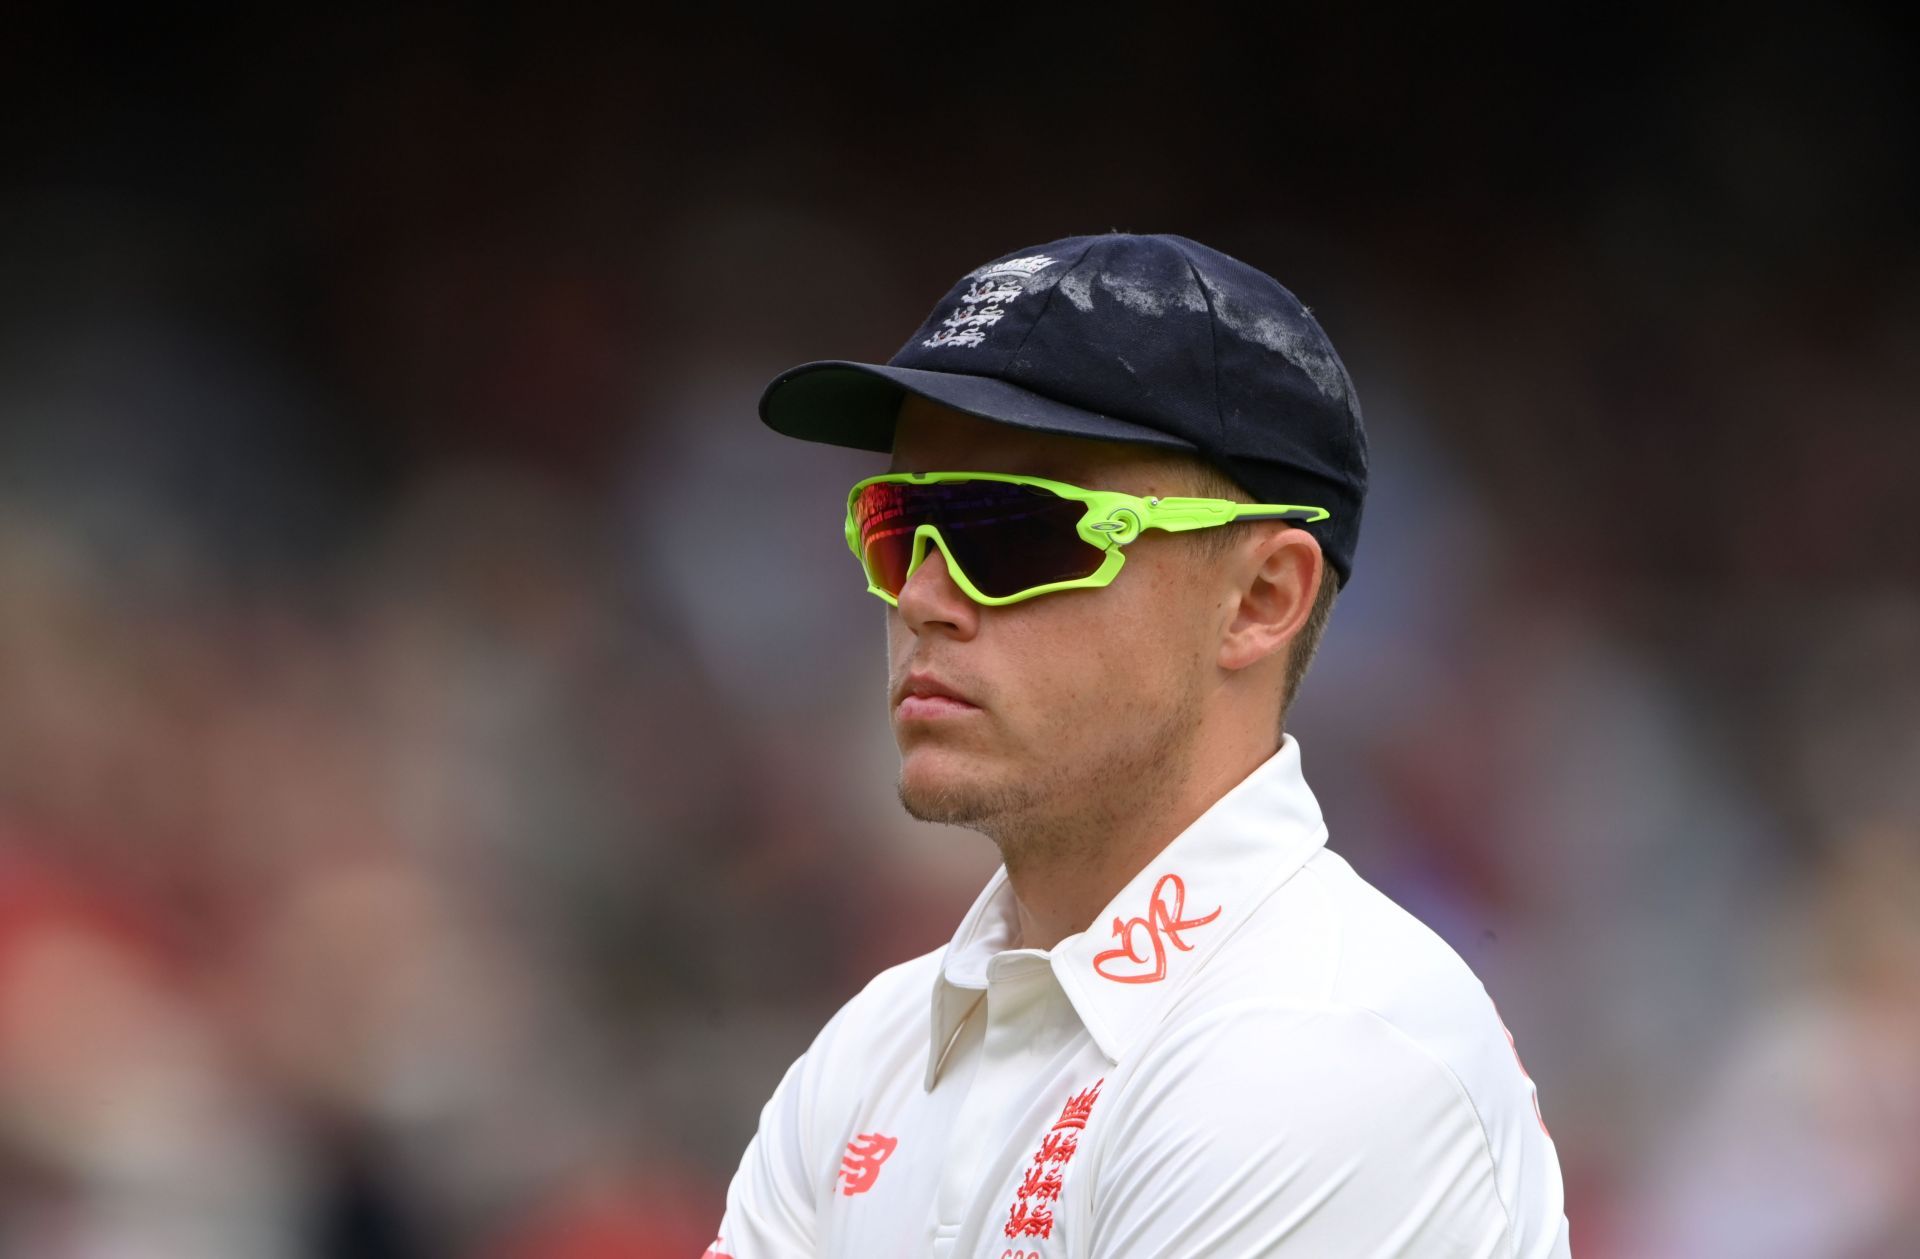 Sam Curran in action during India-England Test in 2021. (Credits: Getty)